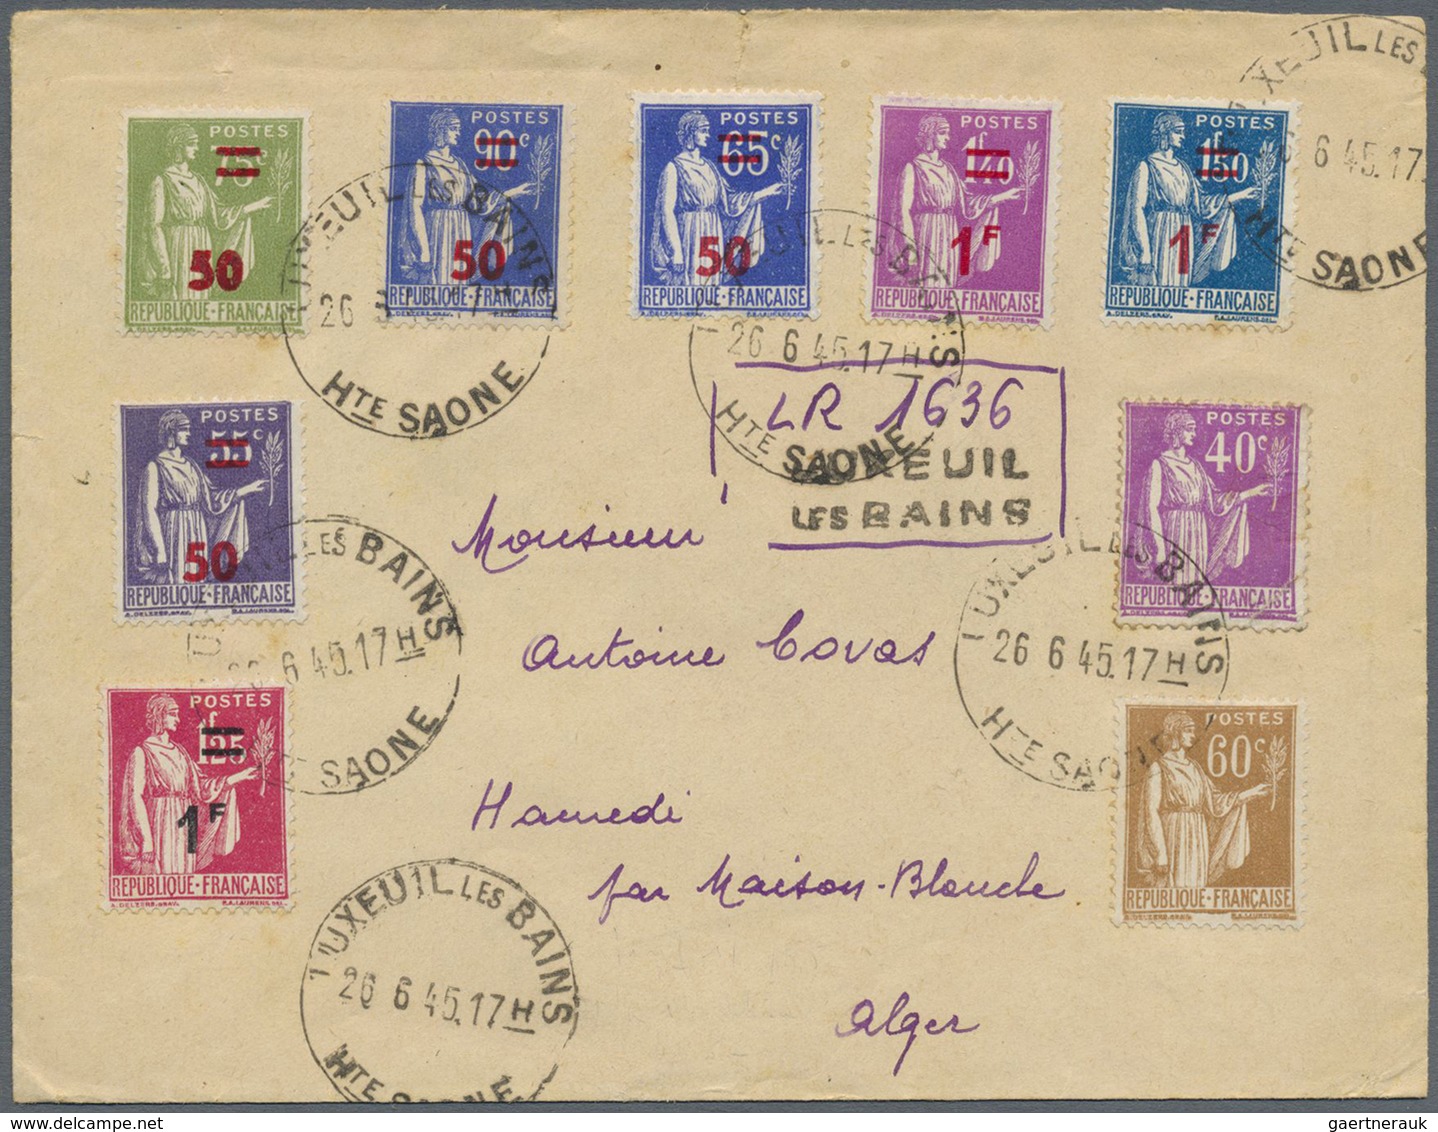 Br Frankreich: 1932/1945, TYPE "PAIX", accumulation of apprx. 1.000 (mainly commercial) covers/cards, c